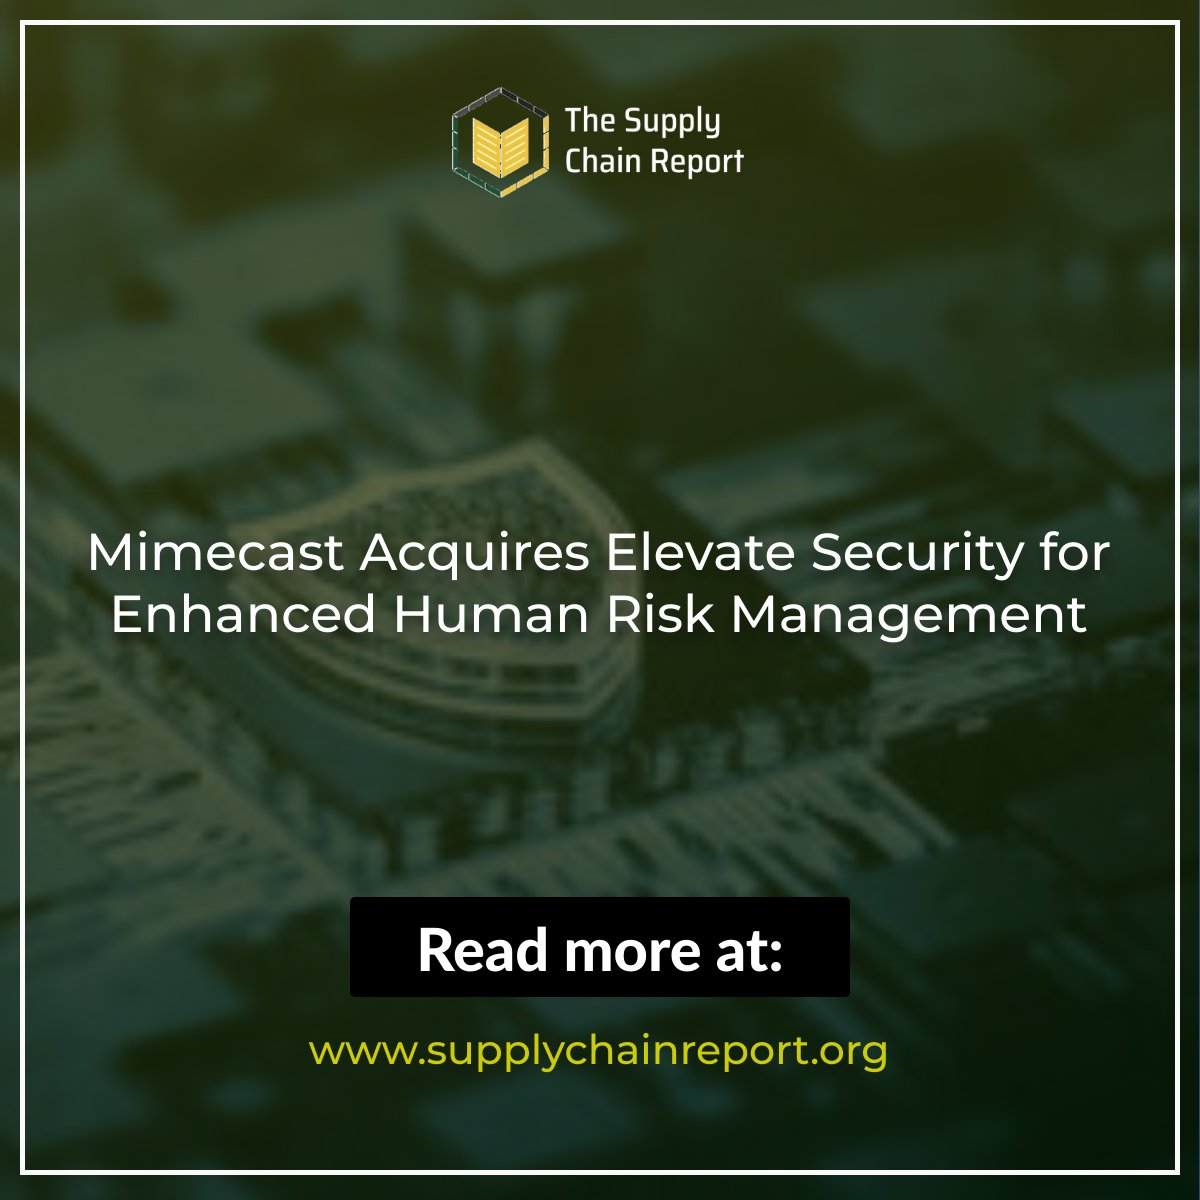 Mimecast Acquires Elevate Security for Enhanced Human Risk Management
Read more here: supplychainreport.org/mimecast-acqui…
#TheSupplyChainReport #mimecast #elevatesecurity #humanriskmanagement